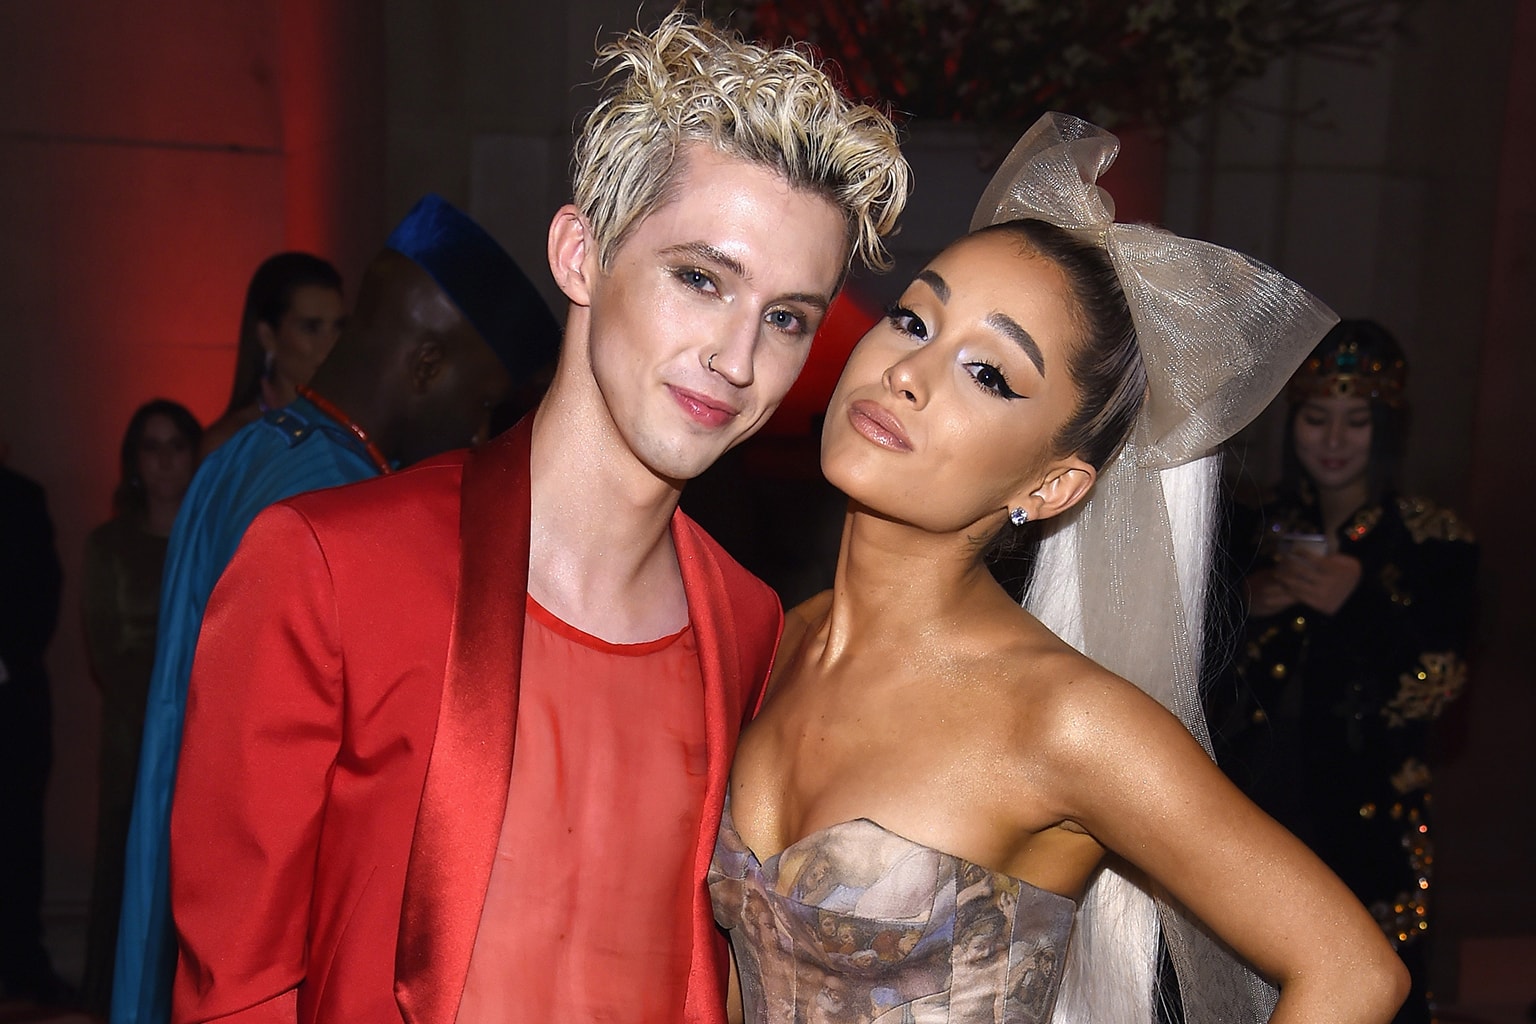 Troye Sivan Releases Single 'Dance To This' Featuring Ariana Grande